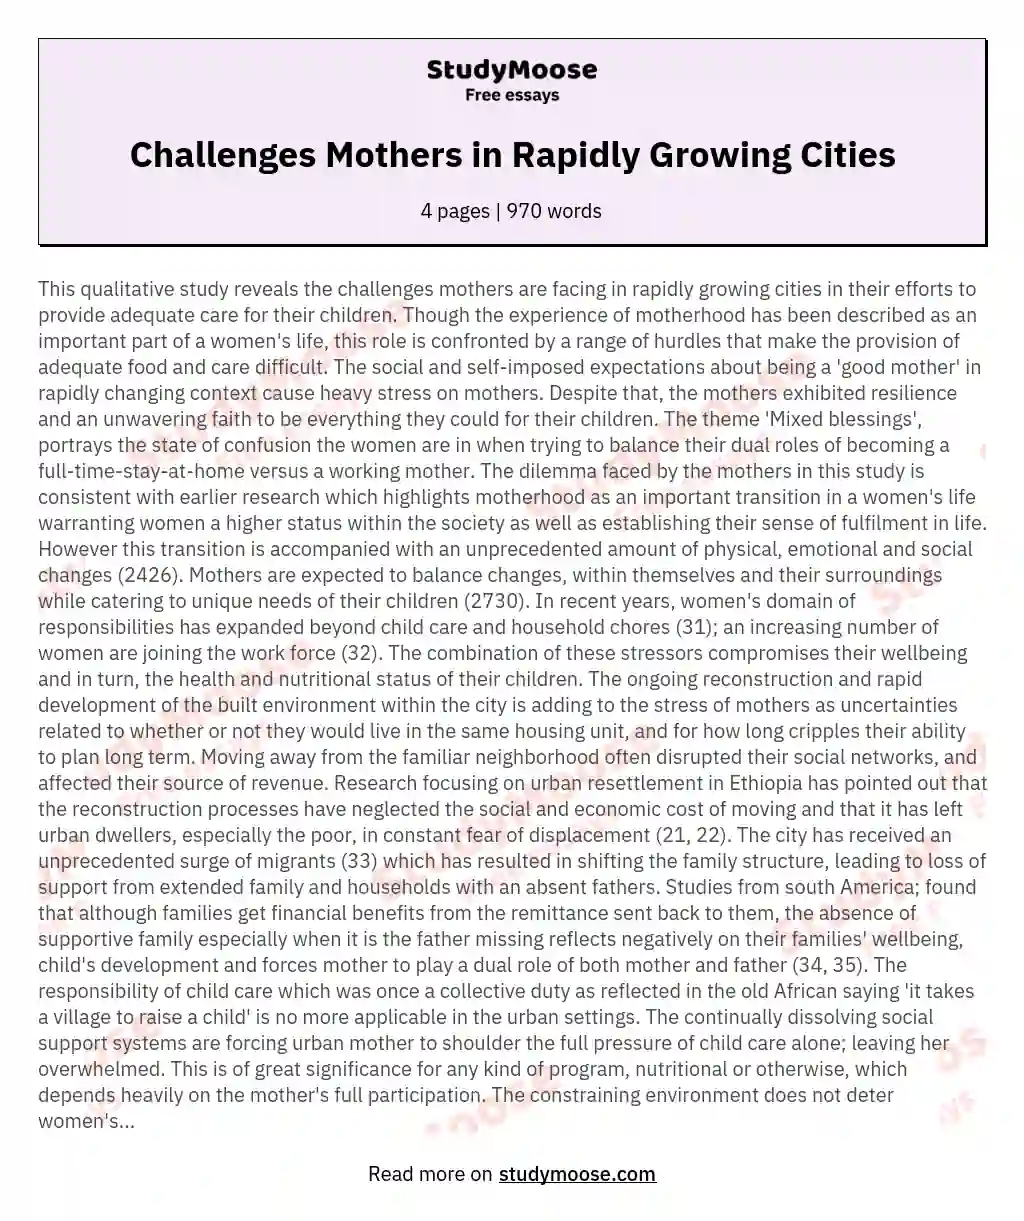 Challenges Mothers in Rapidly Growing Cities essay